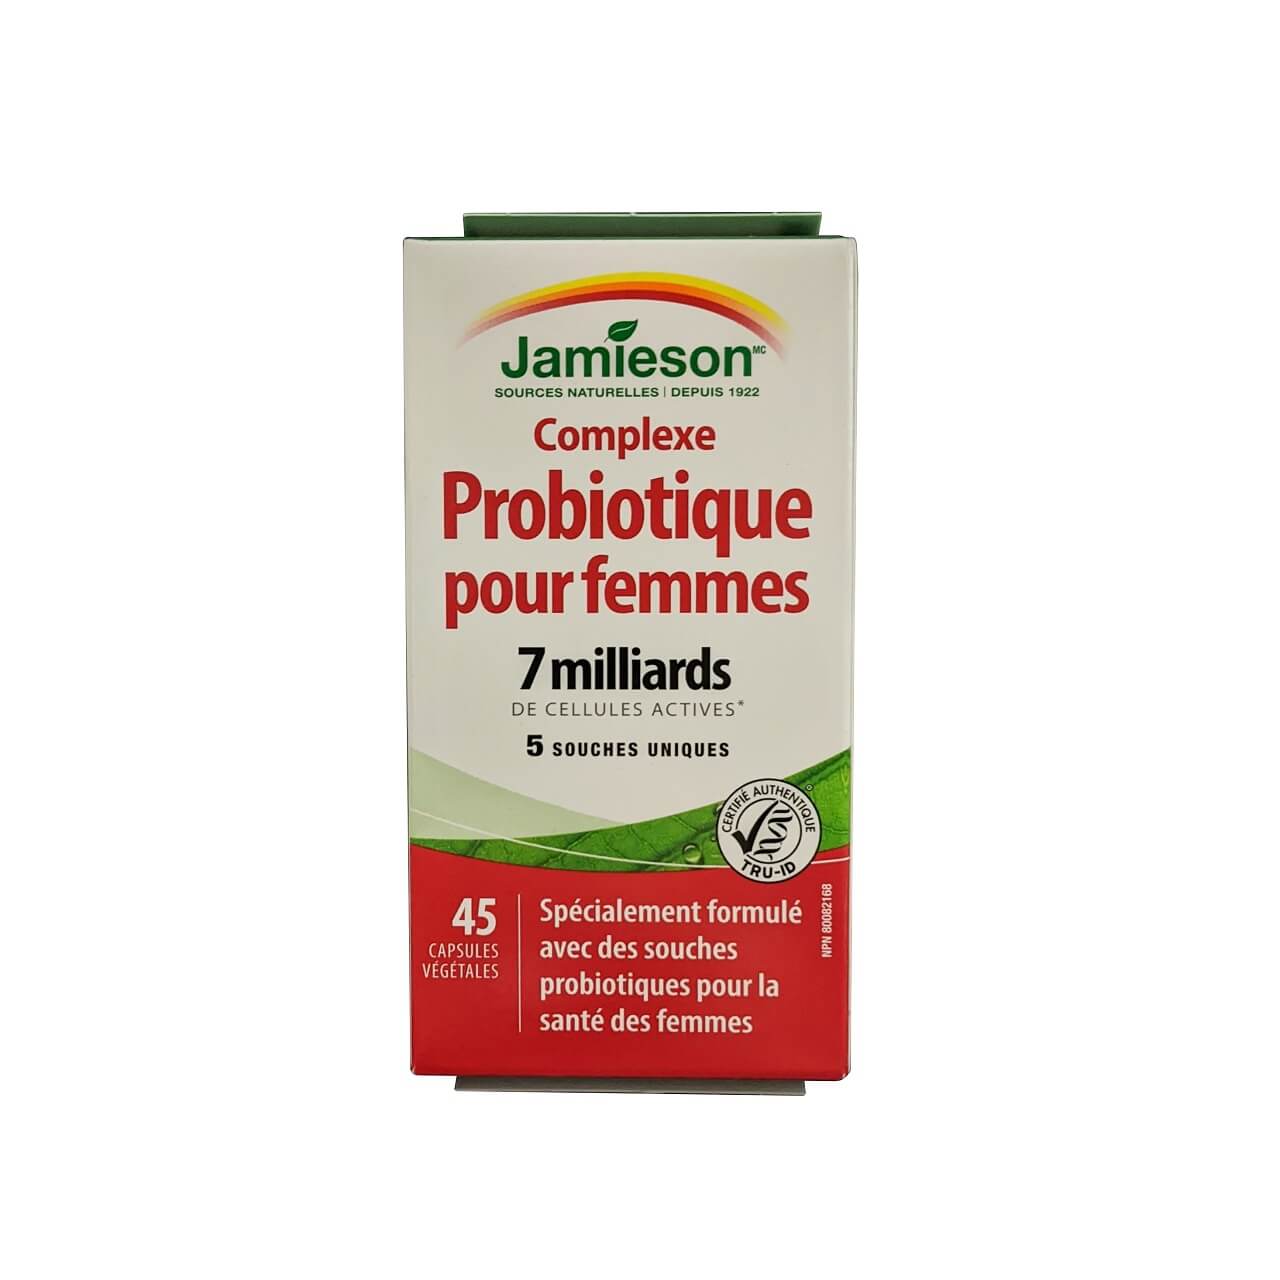 Product label for Jamieson Women's Probiotic Complex 7 Billion (45 capsules) in French